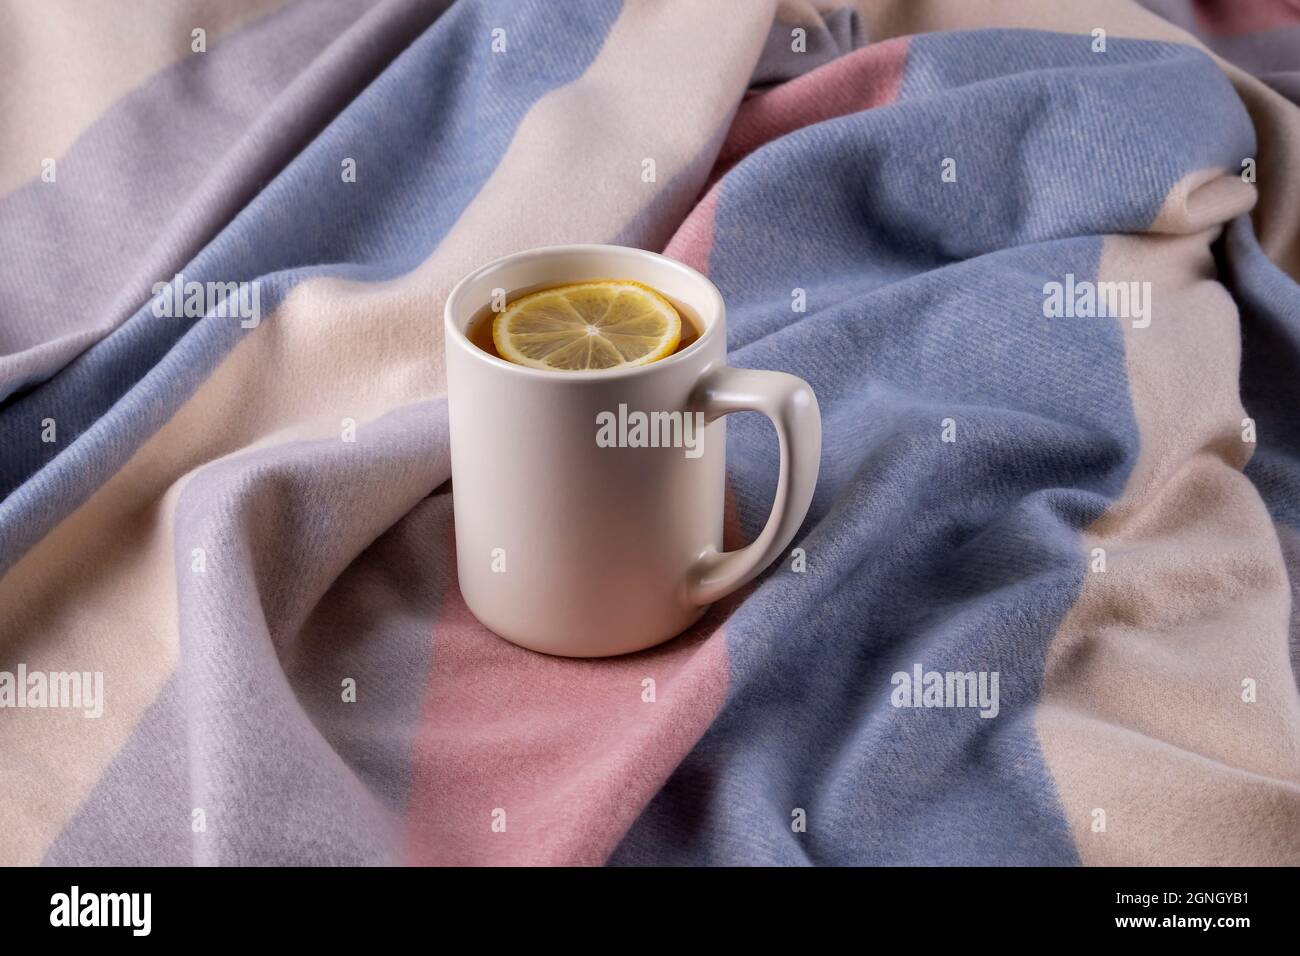 Soft warm scarf in pastel colors and ceramic mug with hot tea Stock Photo